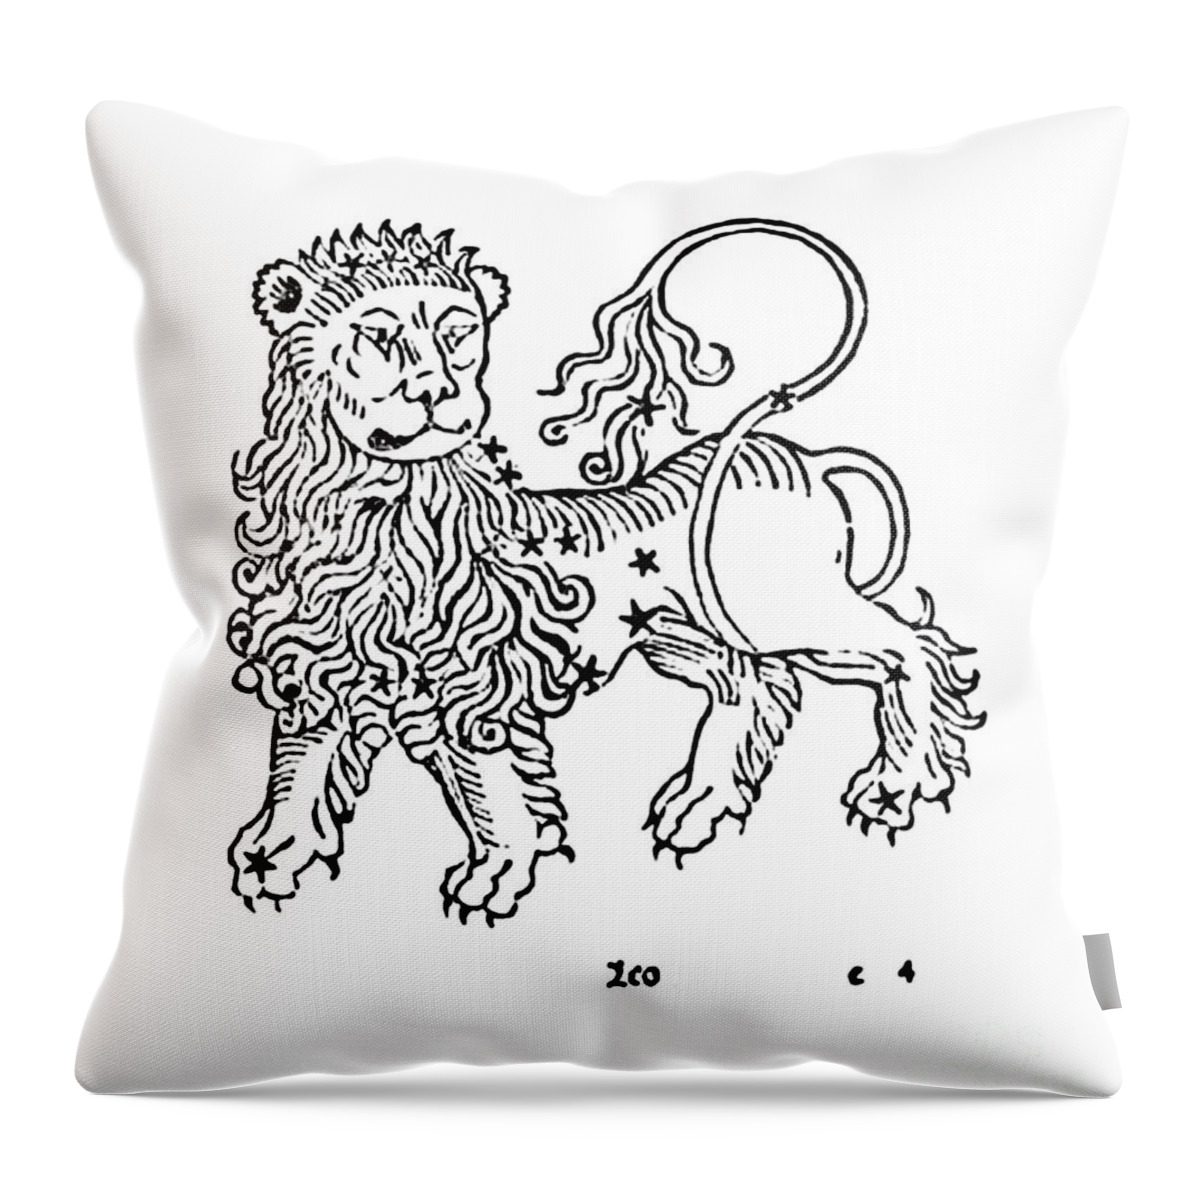 Gemini Throw Pillow featuring the photograph Leo Constellation Zodiac Sign 1482 by Science Source